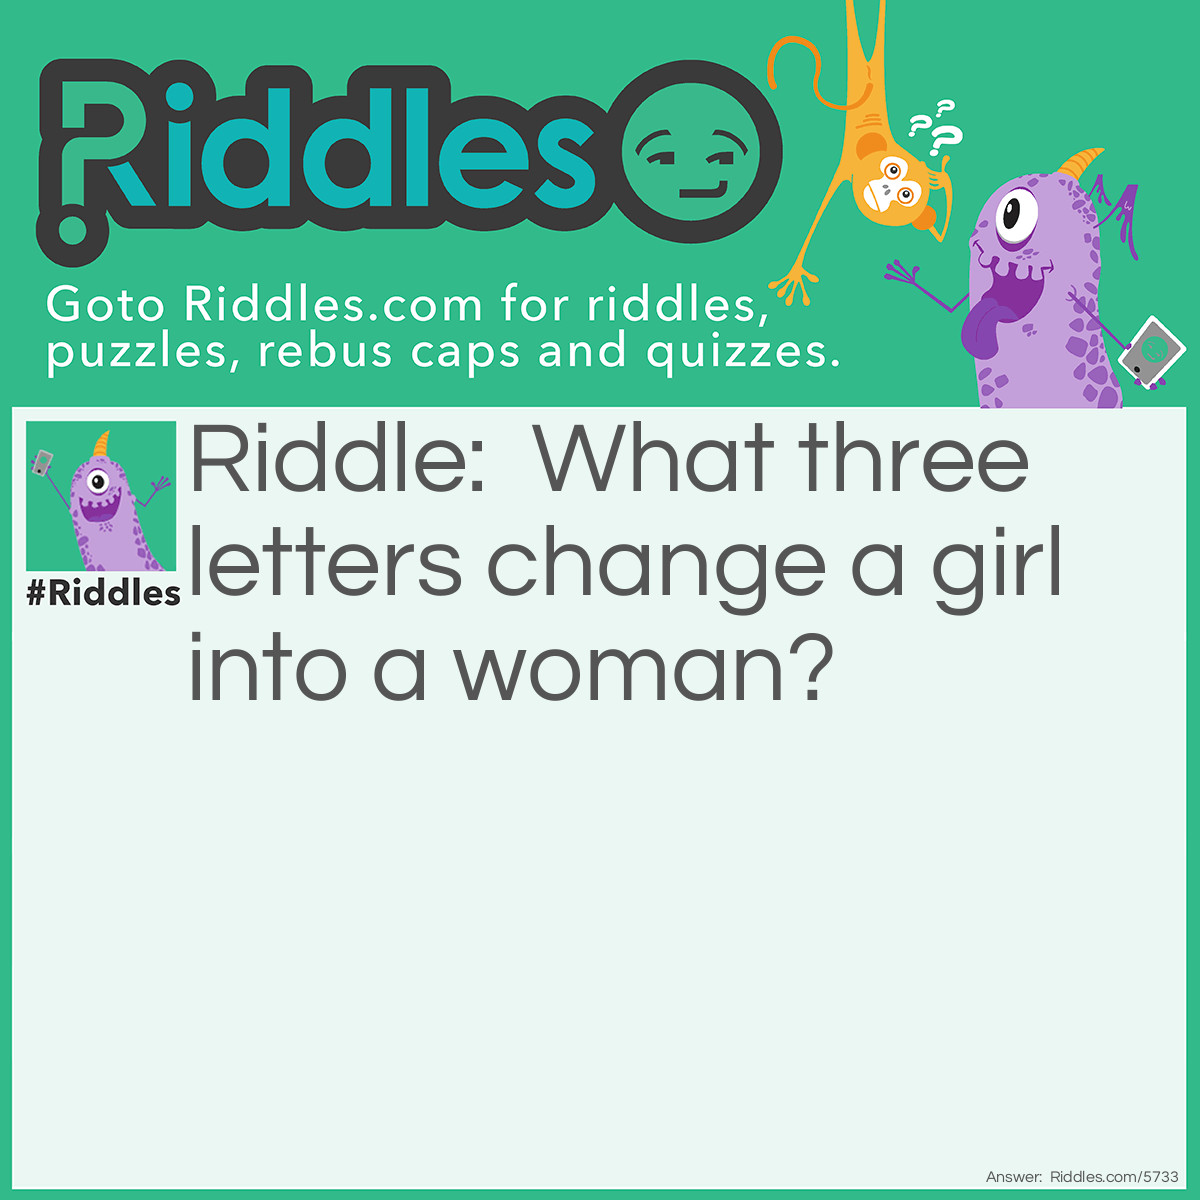 Riddle: What three letters change a girl into a woman? Answer: Removing the letters G,I and R and replacing them with the three letters A,D and Y makes the word "lady", which is another word for woman.